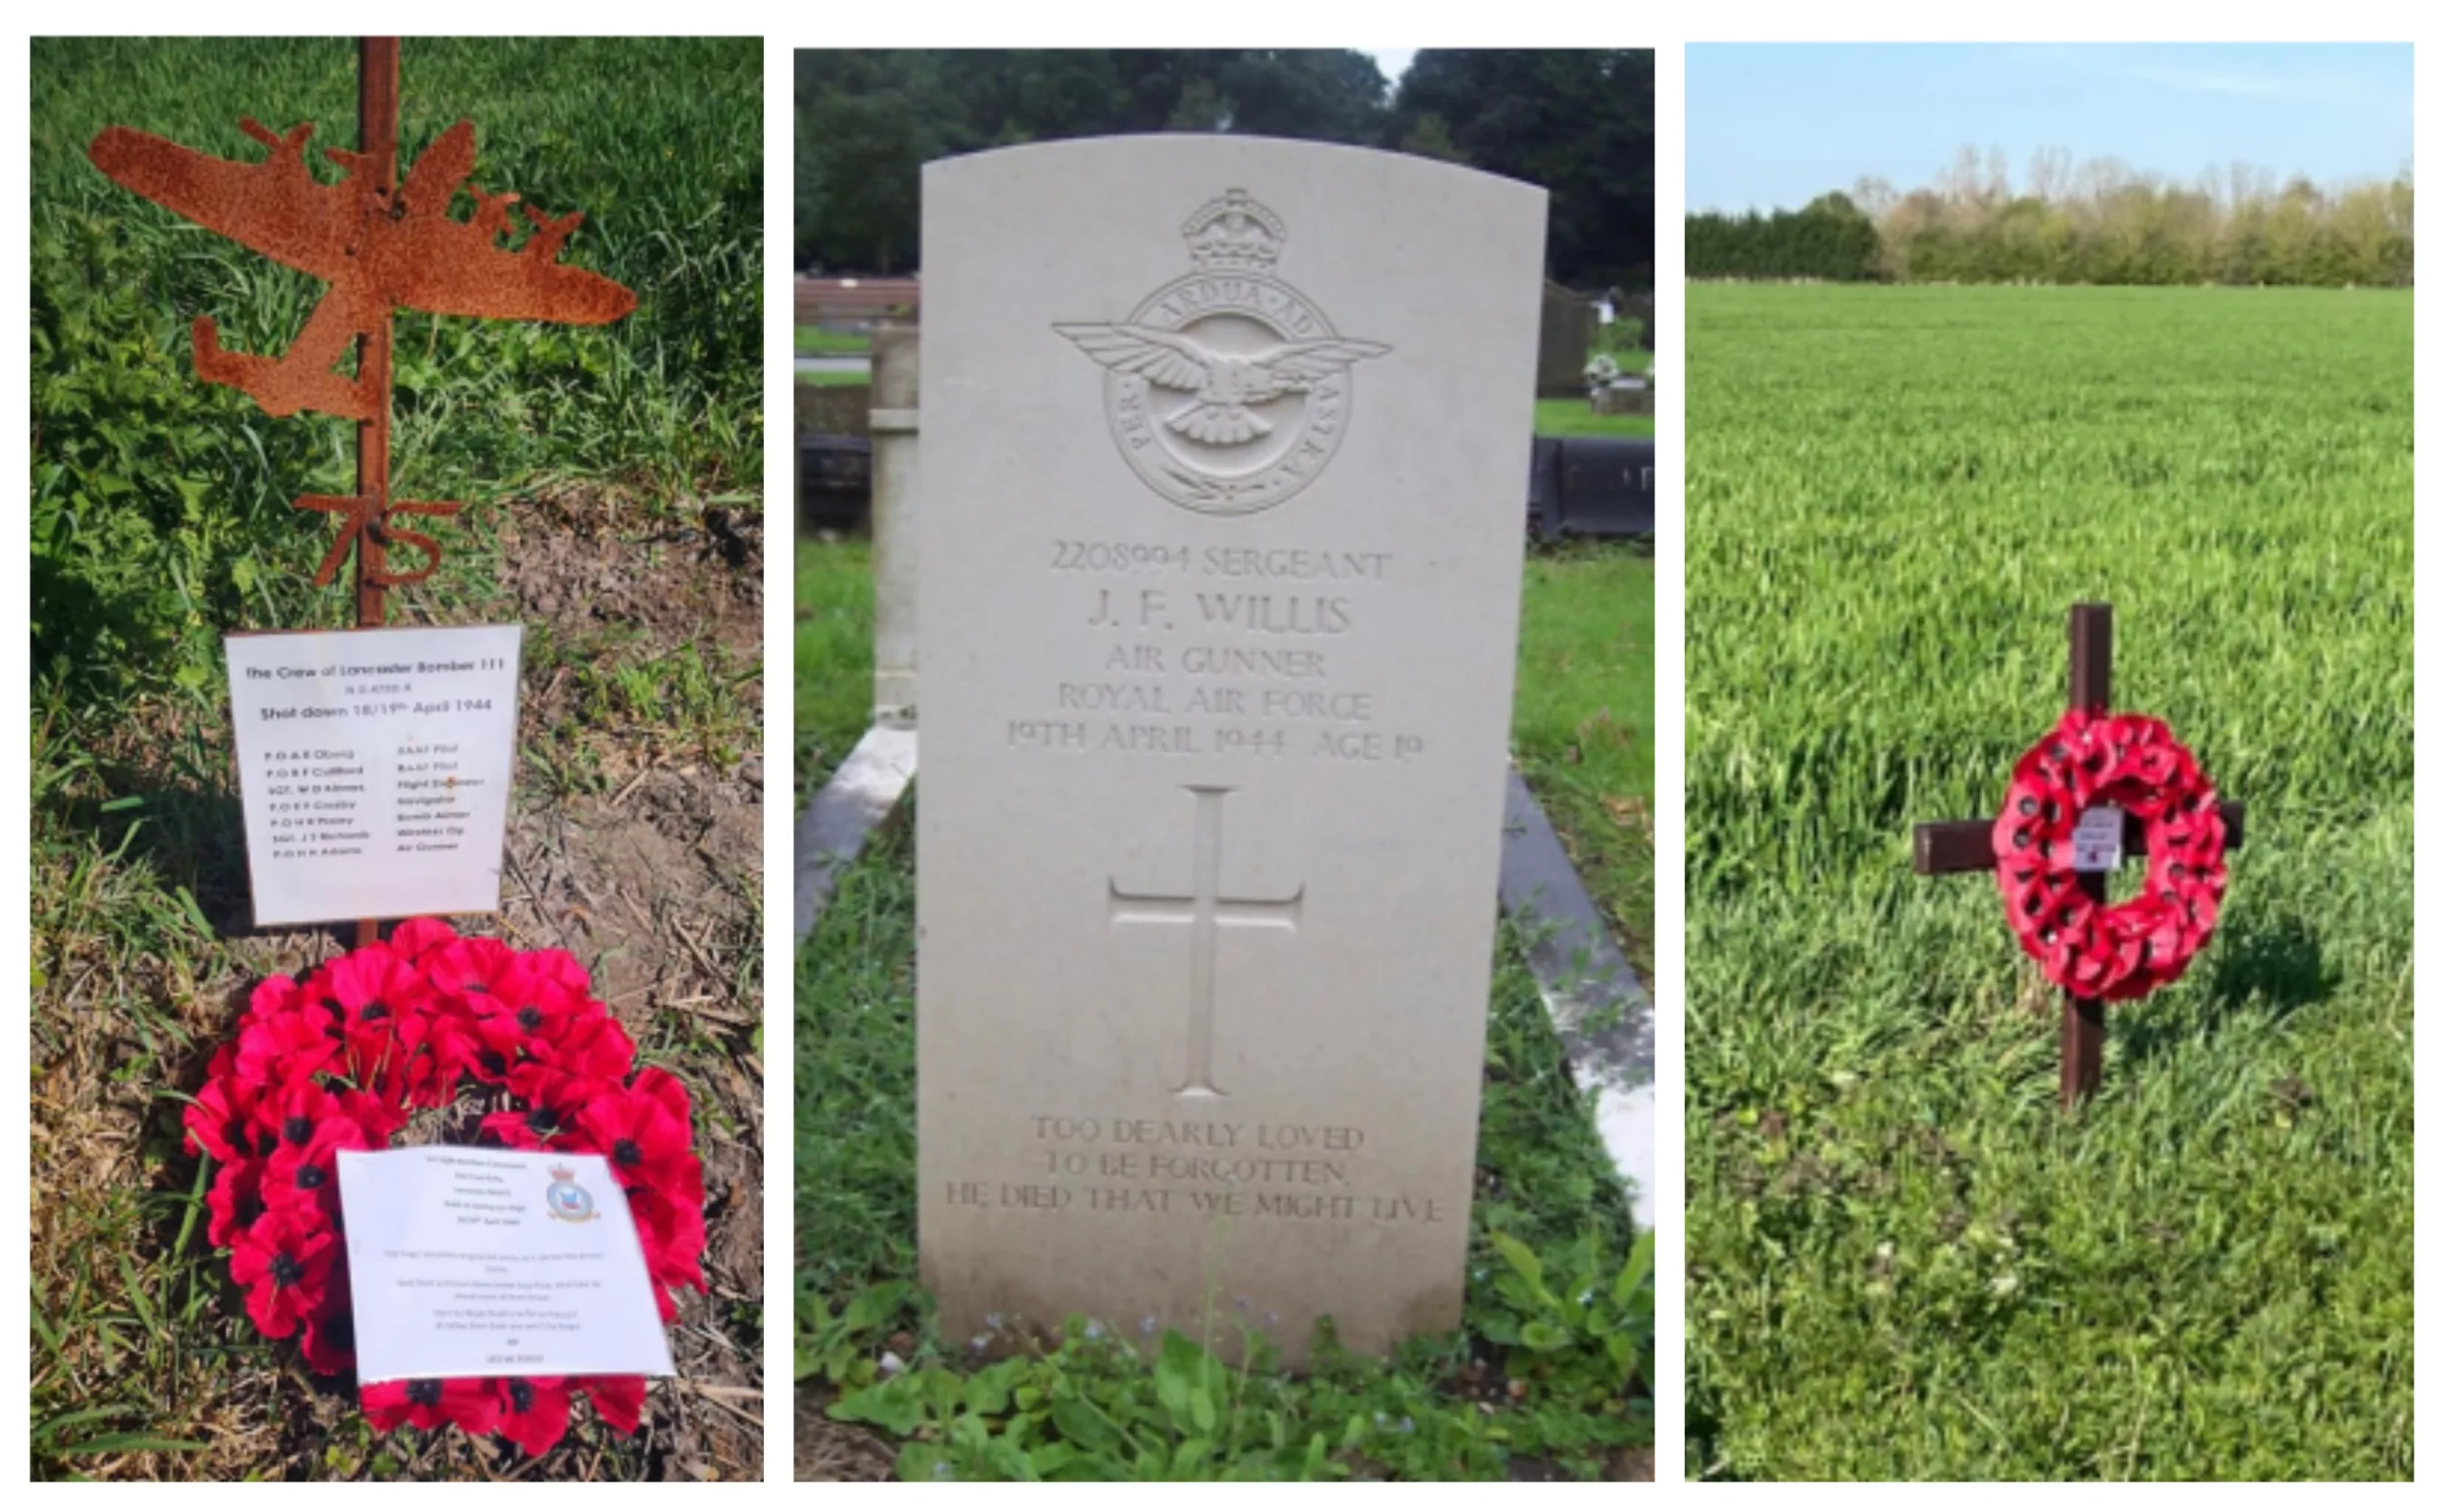 From left: Anniversary memorial placed by Brown Family, The grave of Sgt John Willis, Bury Cemetery, Lancashire, and memorial placed by local resident